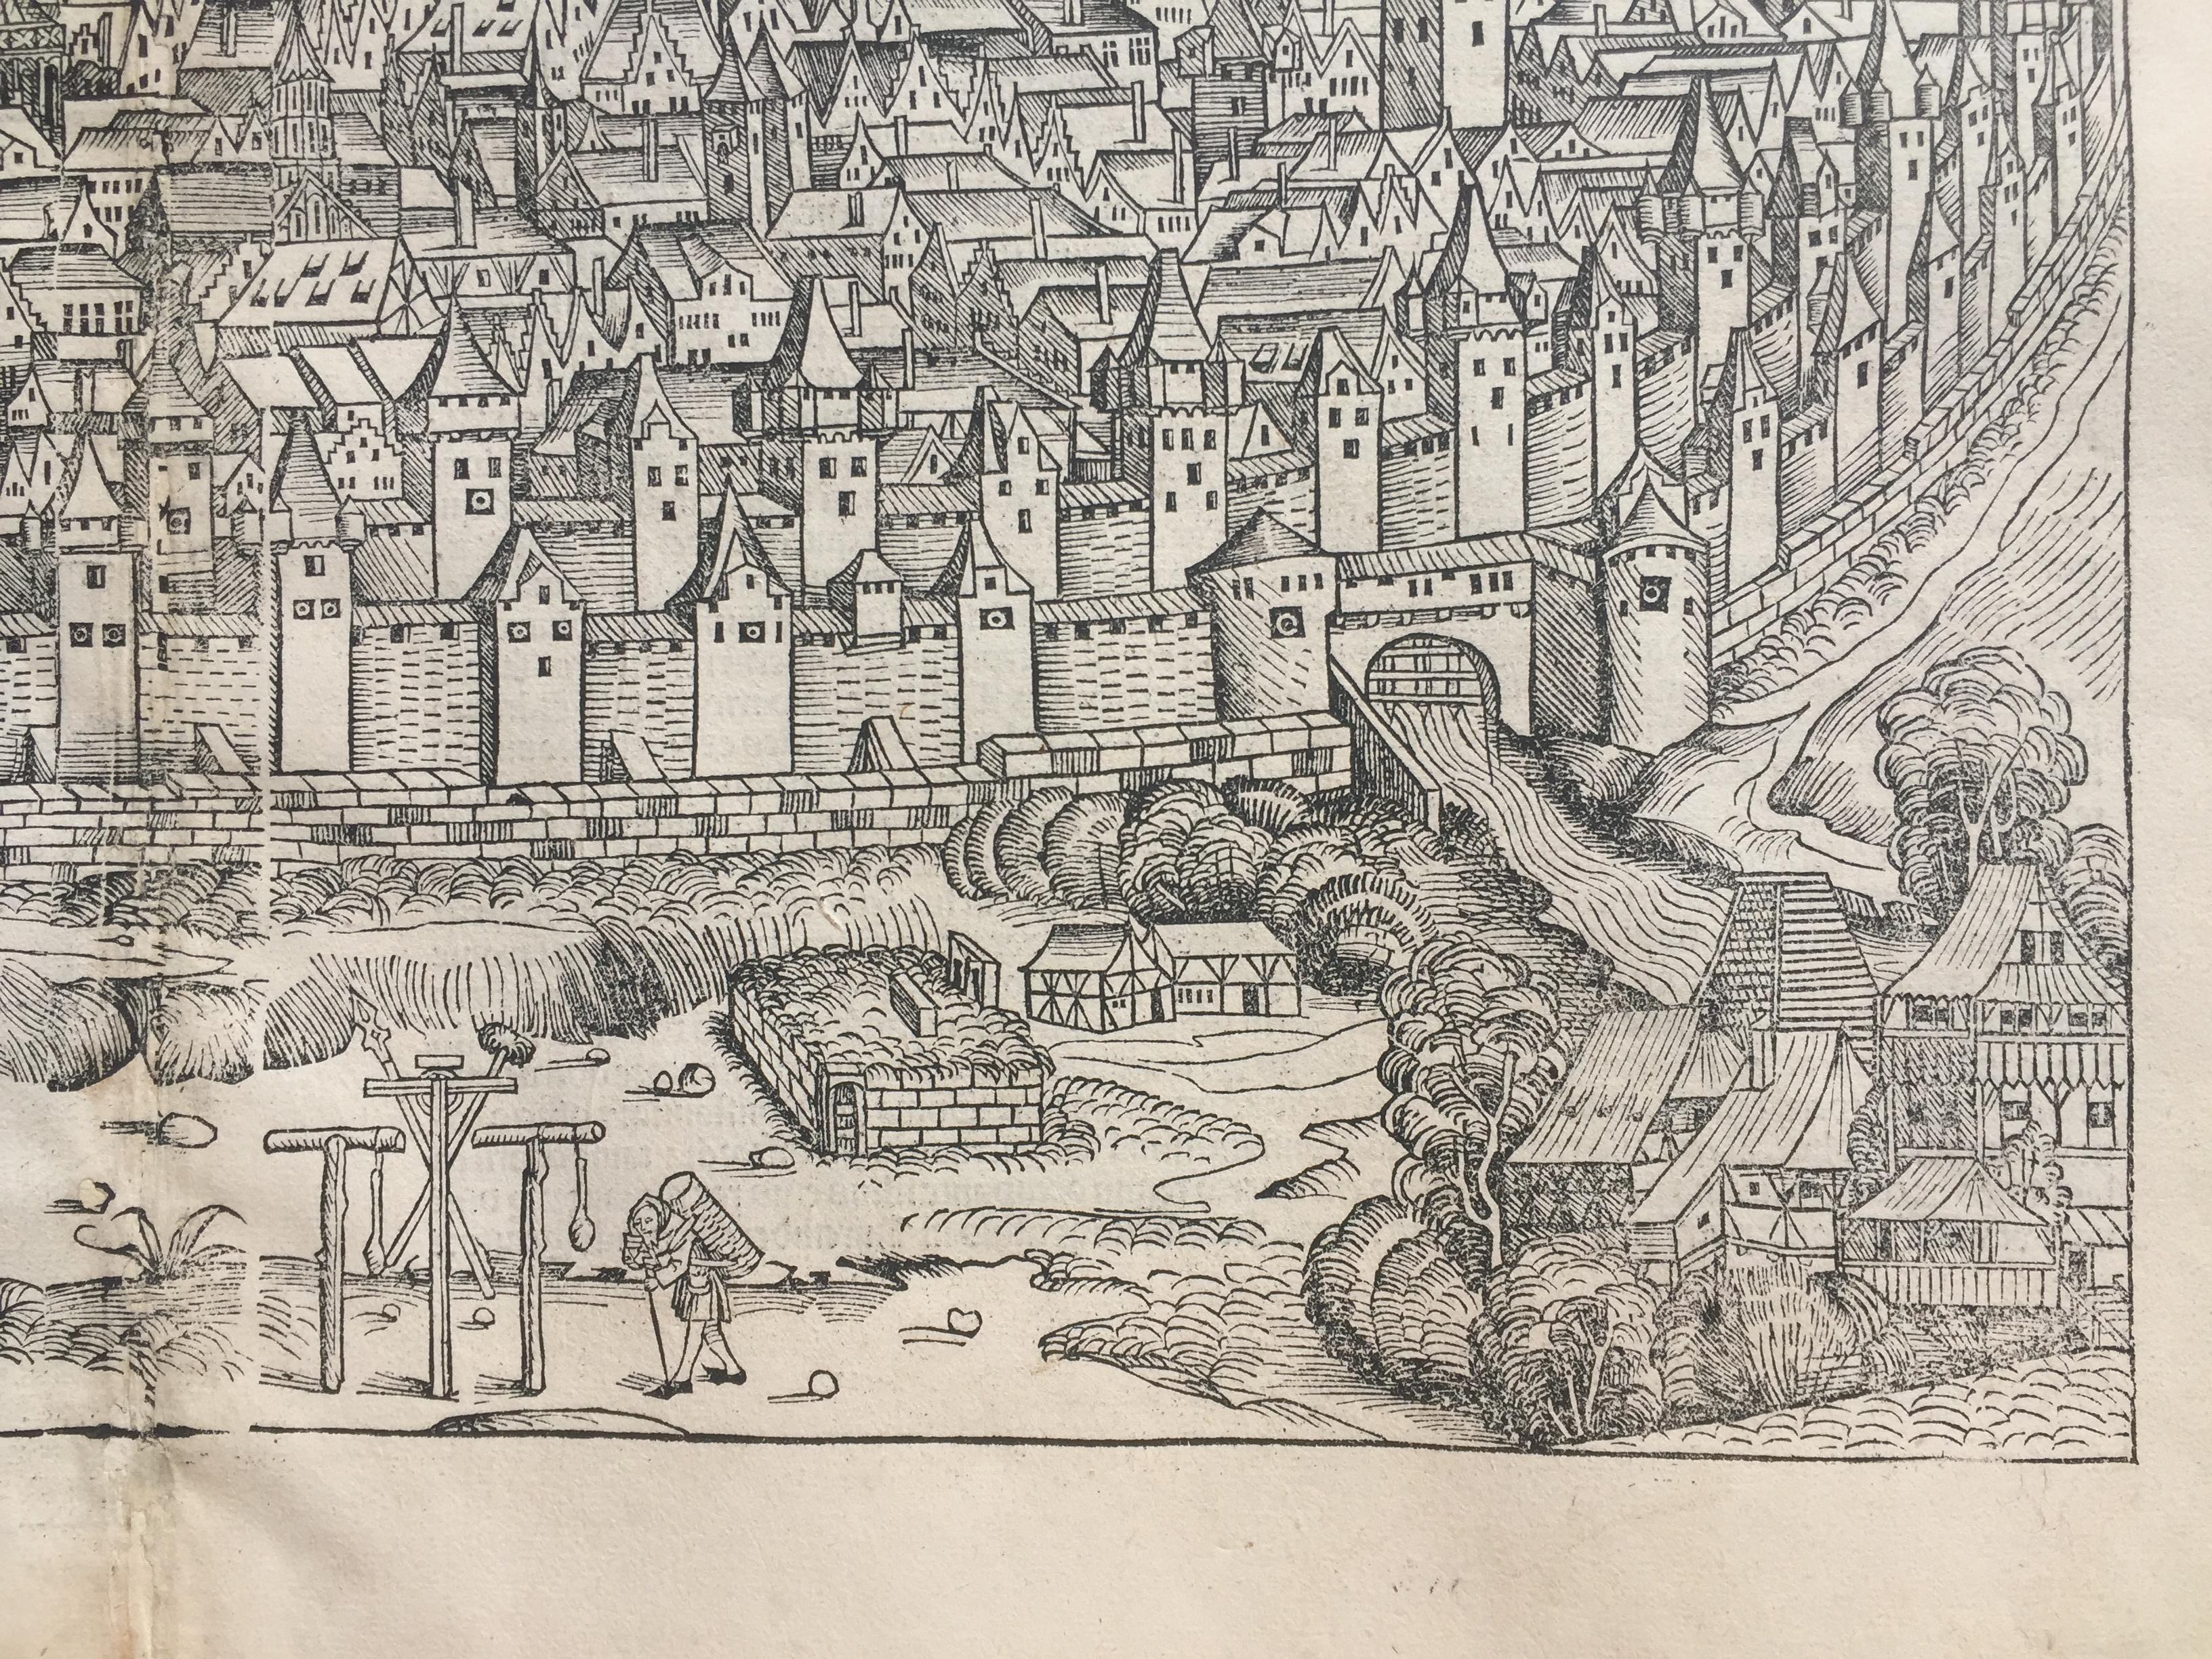 View of Nuremberg from Nuremberg Chronicle - 527 years old - Old Masters Print by Unknown